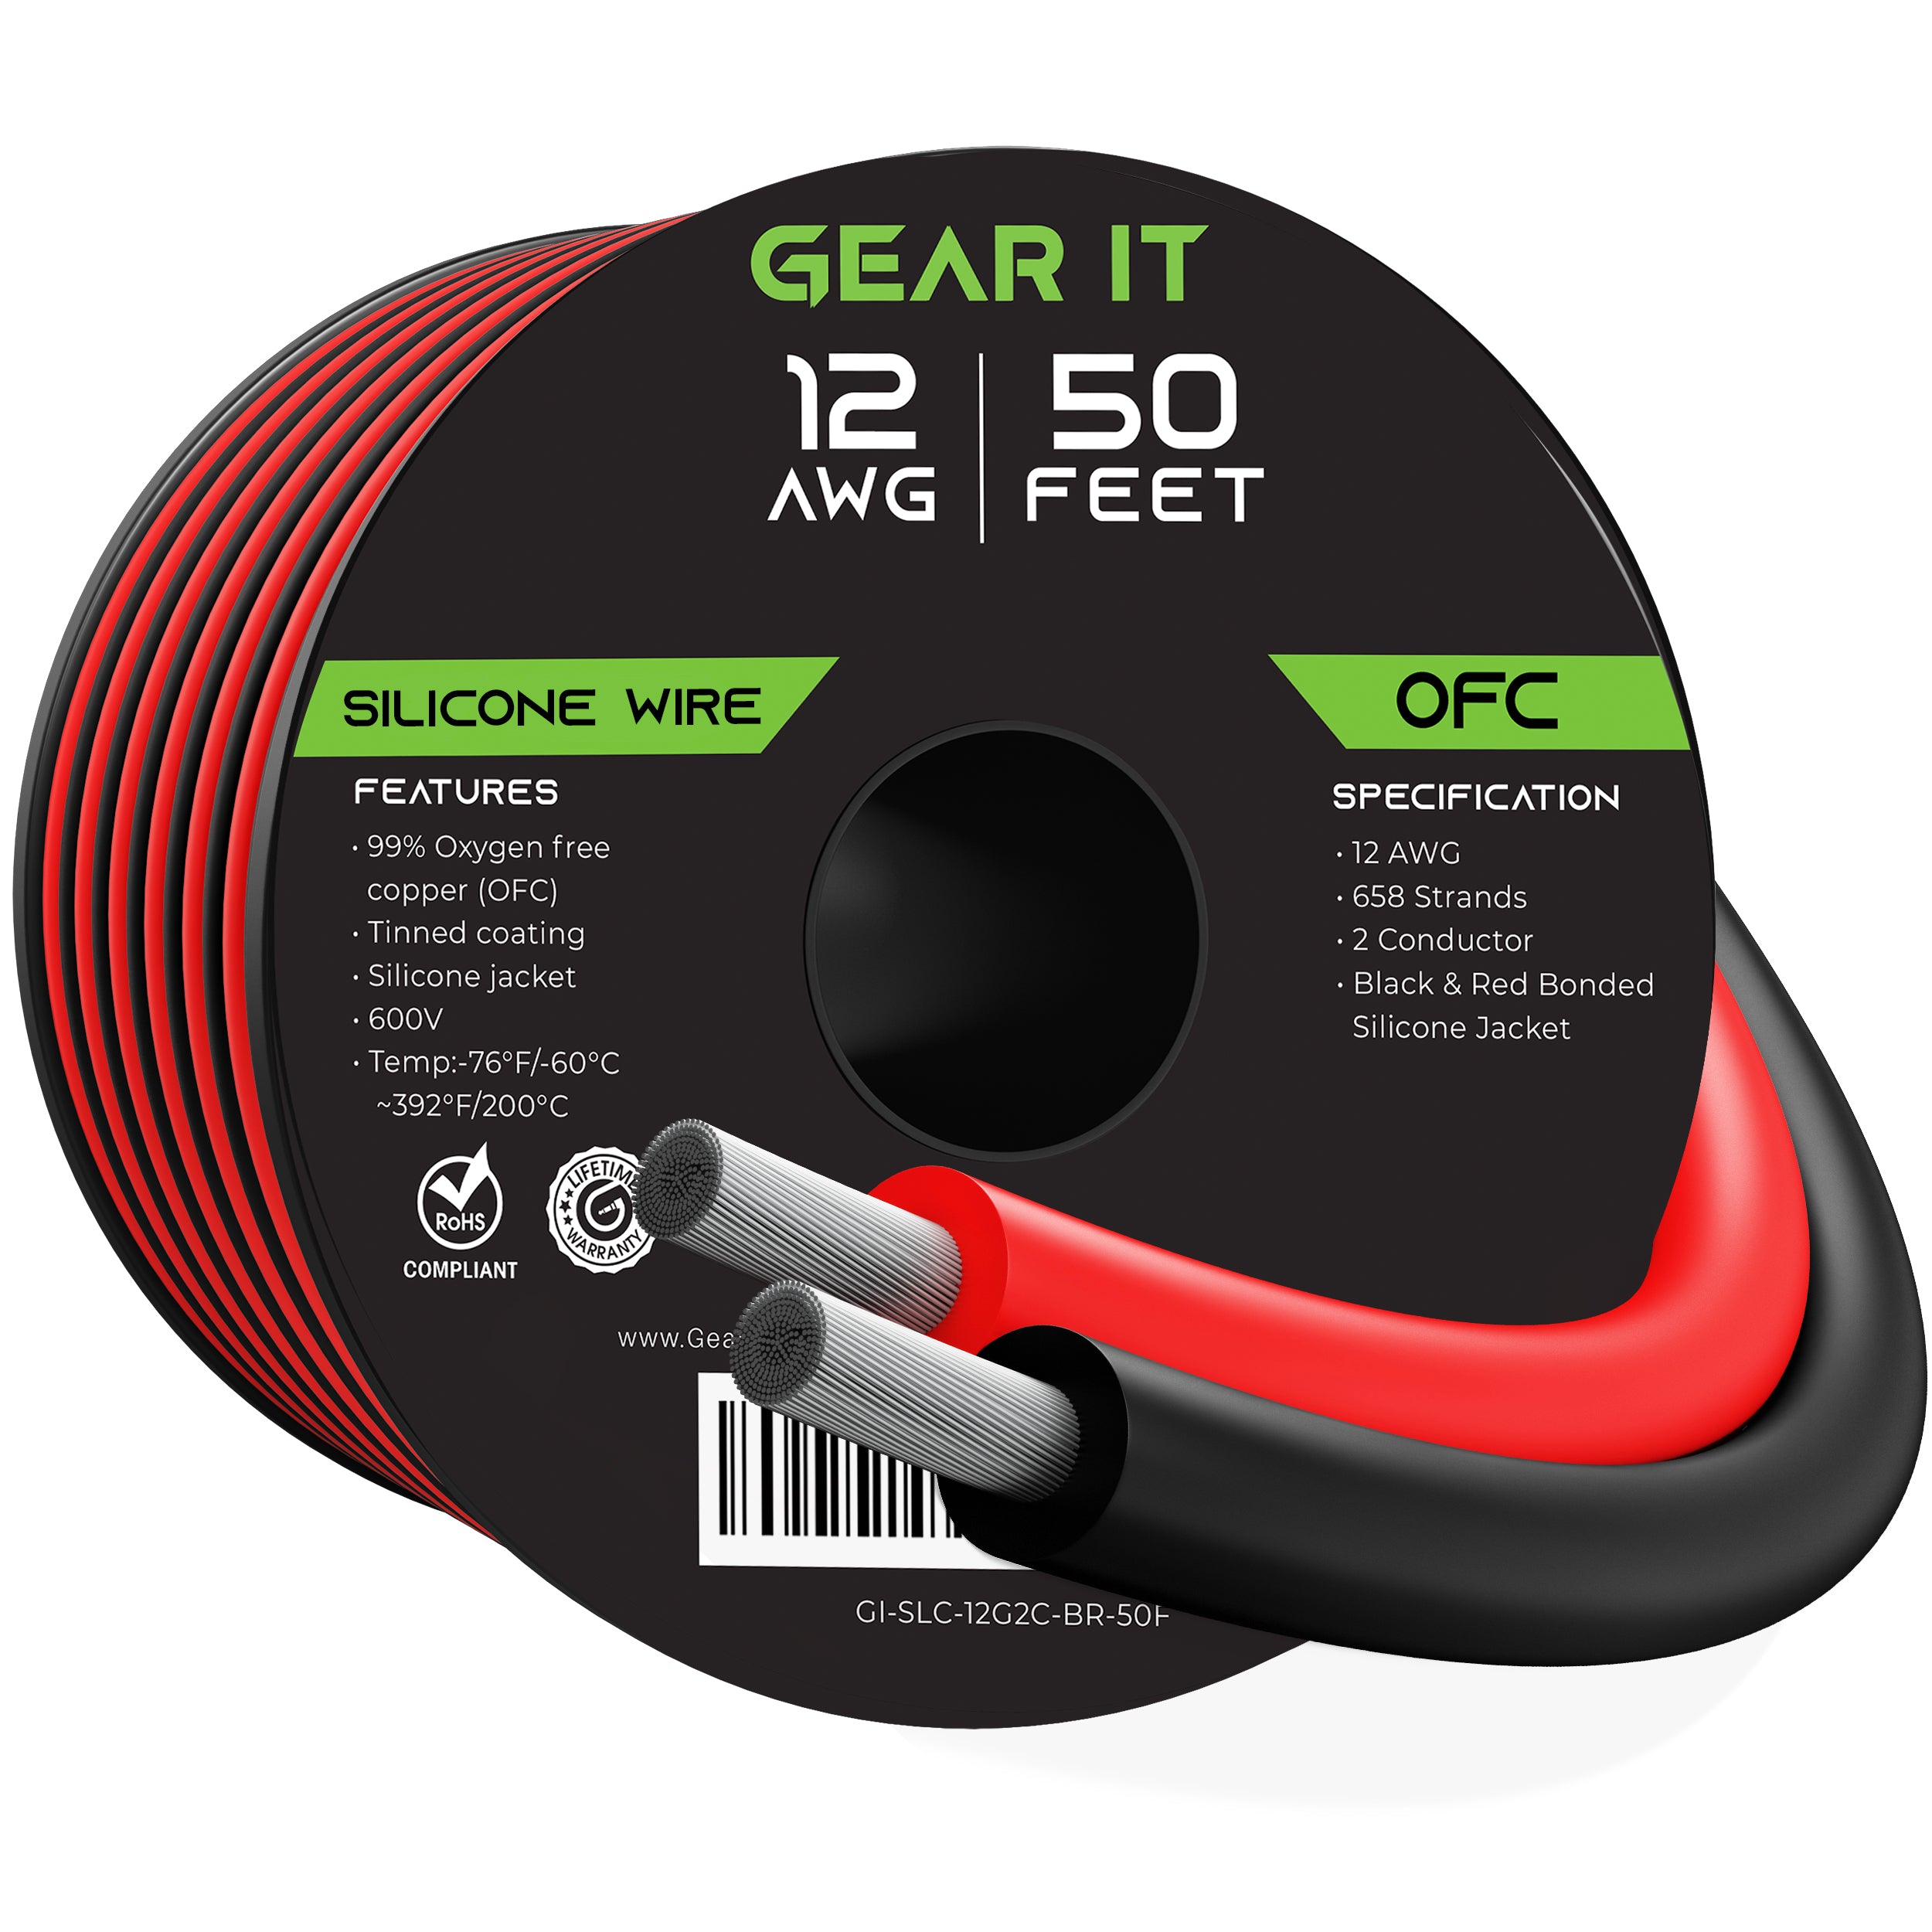 GearIT 12 Gauge Silicone Wire 600V (Bonded Black/Red - 100 Feet) 12AWG Tinned OFC Oxygen Free Copper Stranded Soft Flexible Wires for Primary